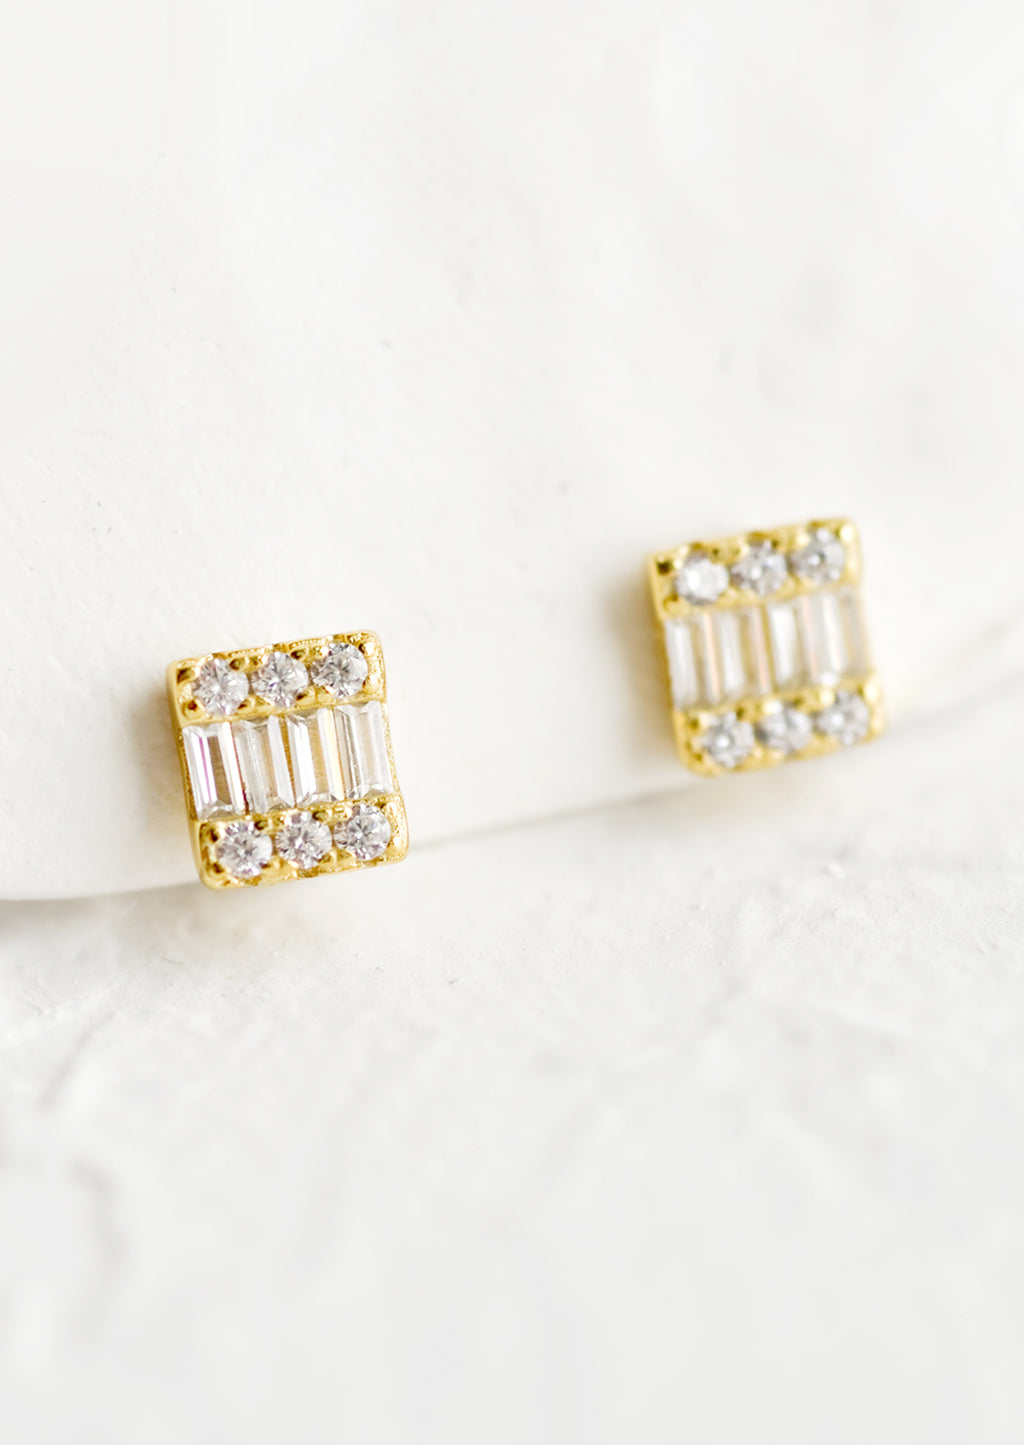 2: Square gold stud earrings with art deco look and sparkling cubic zirconia.